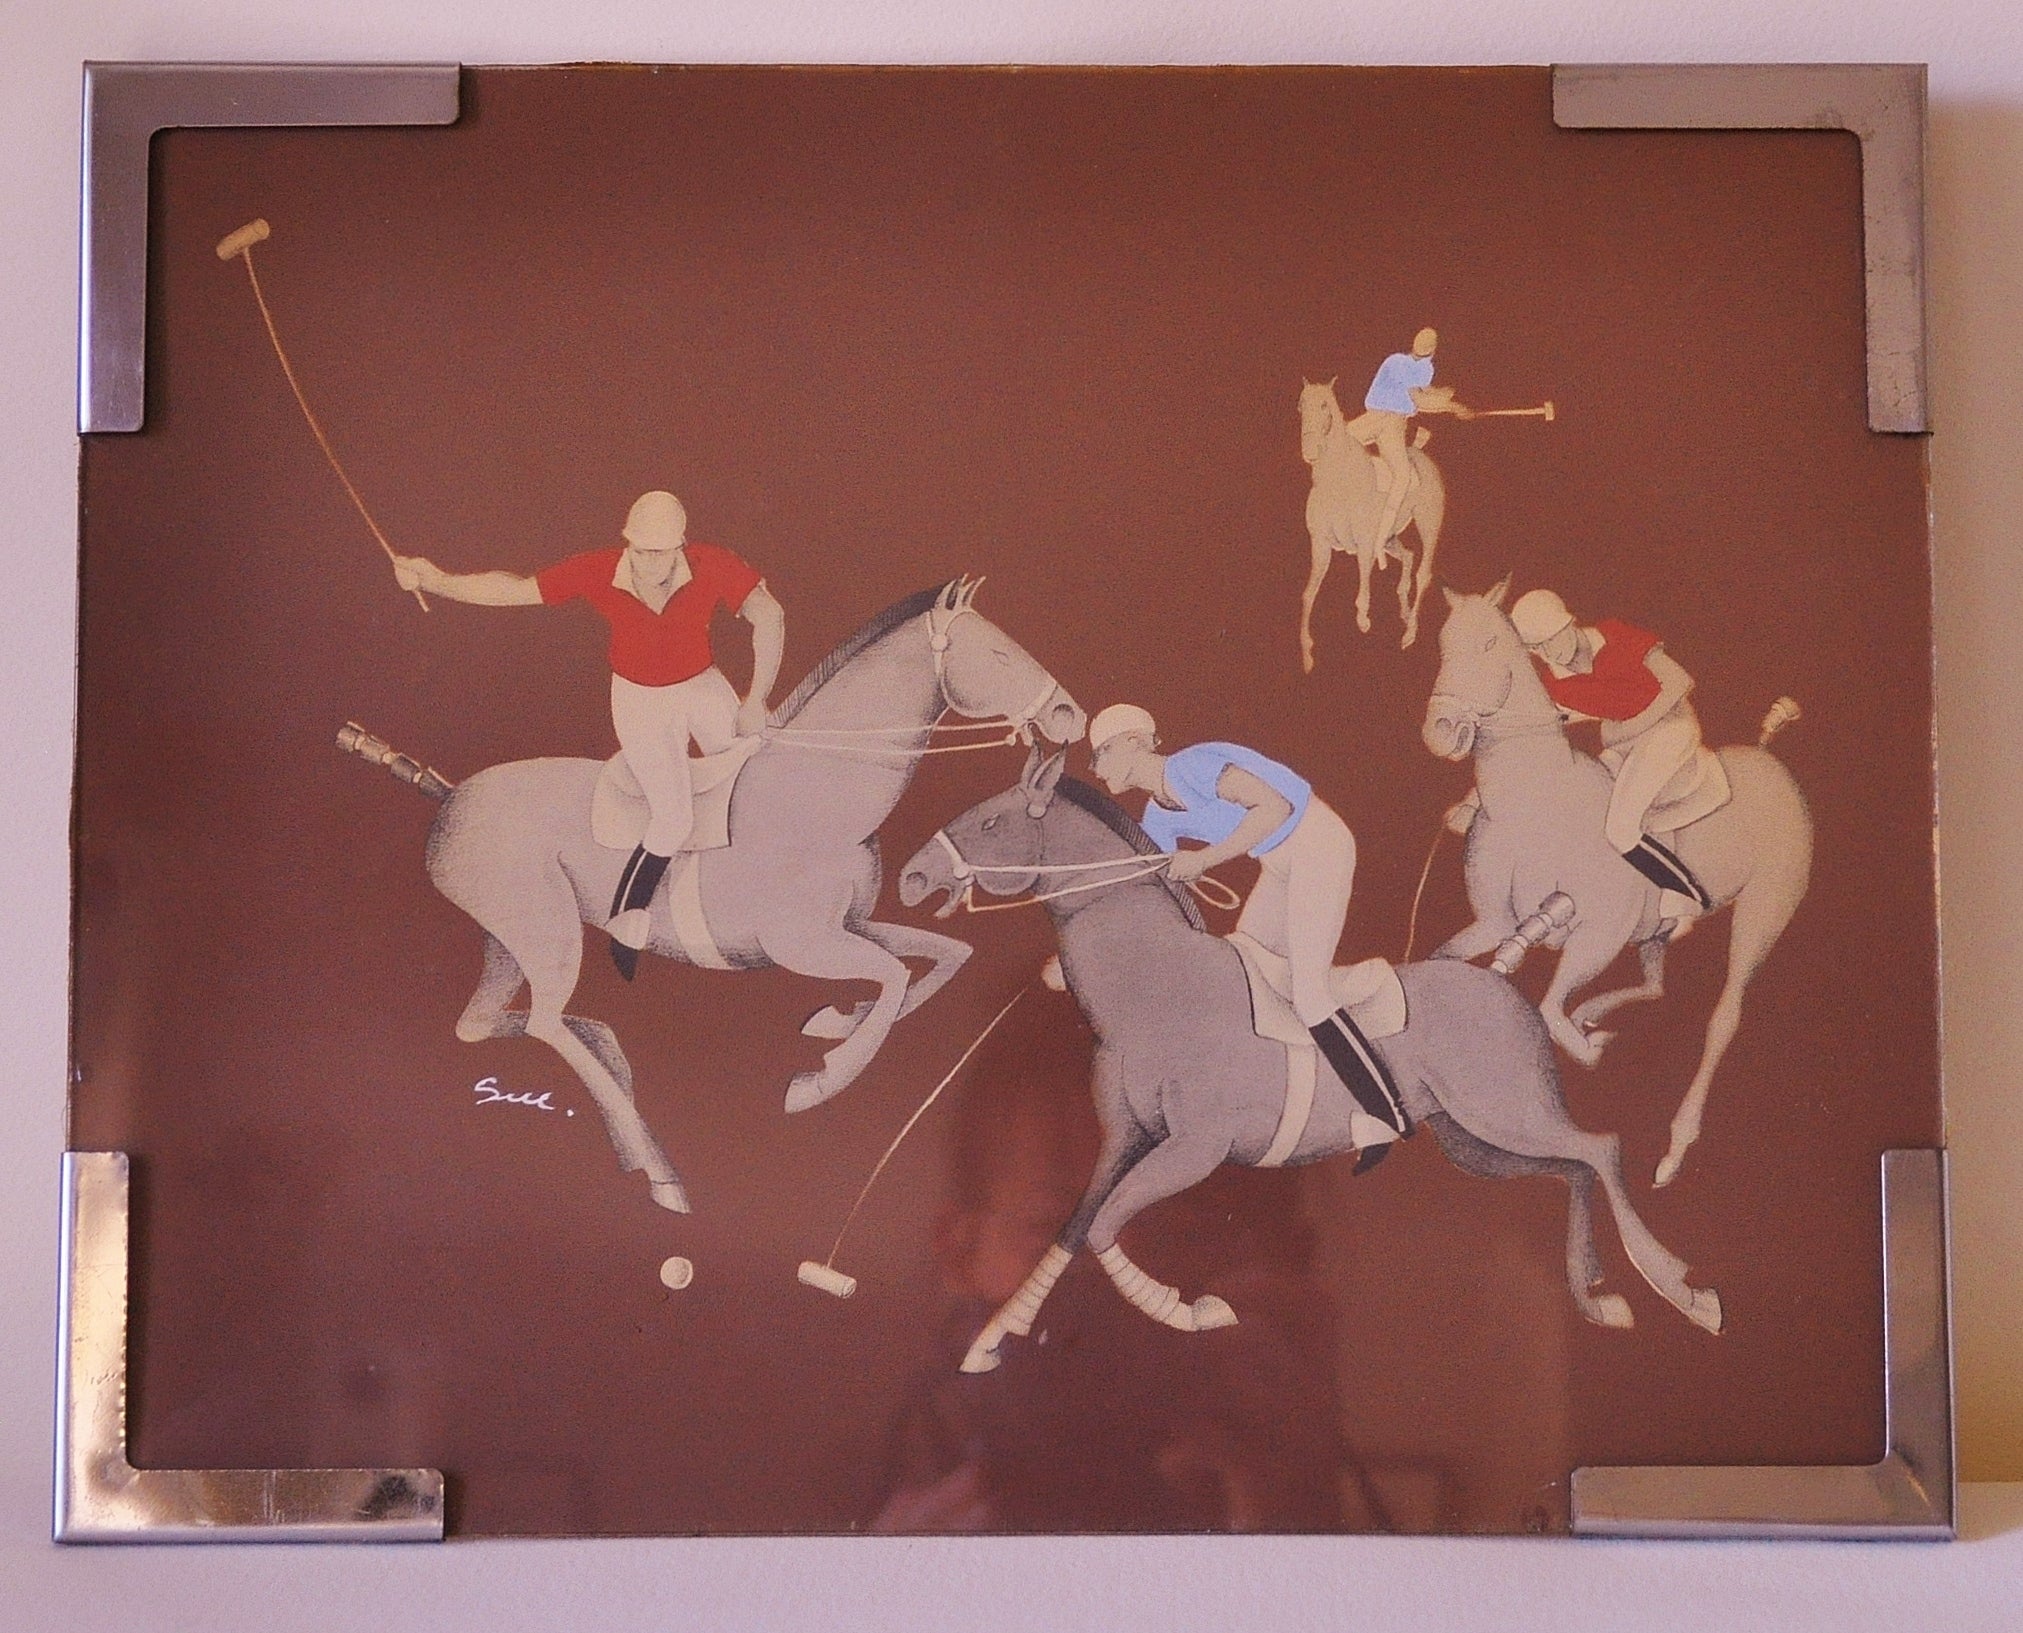 American Art Deco Newman Decor Polo Match Airbrush Painting by Sue in NRA Frame. For Sale